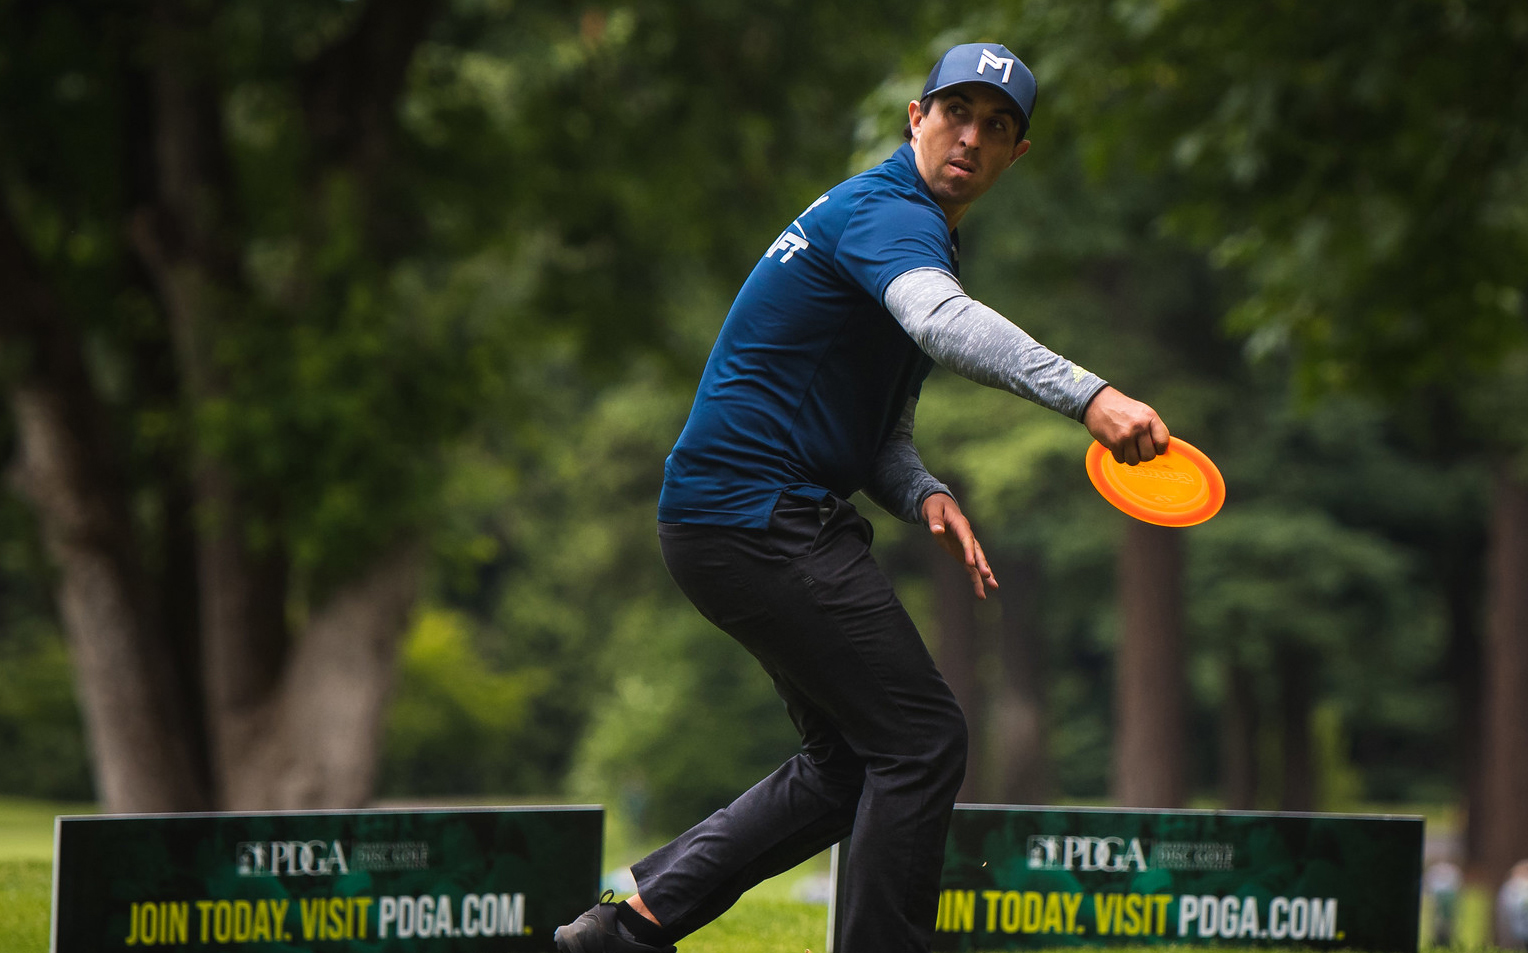 DISC GOLF on ESPN?! Disc golf will be on TV again today! Tune into